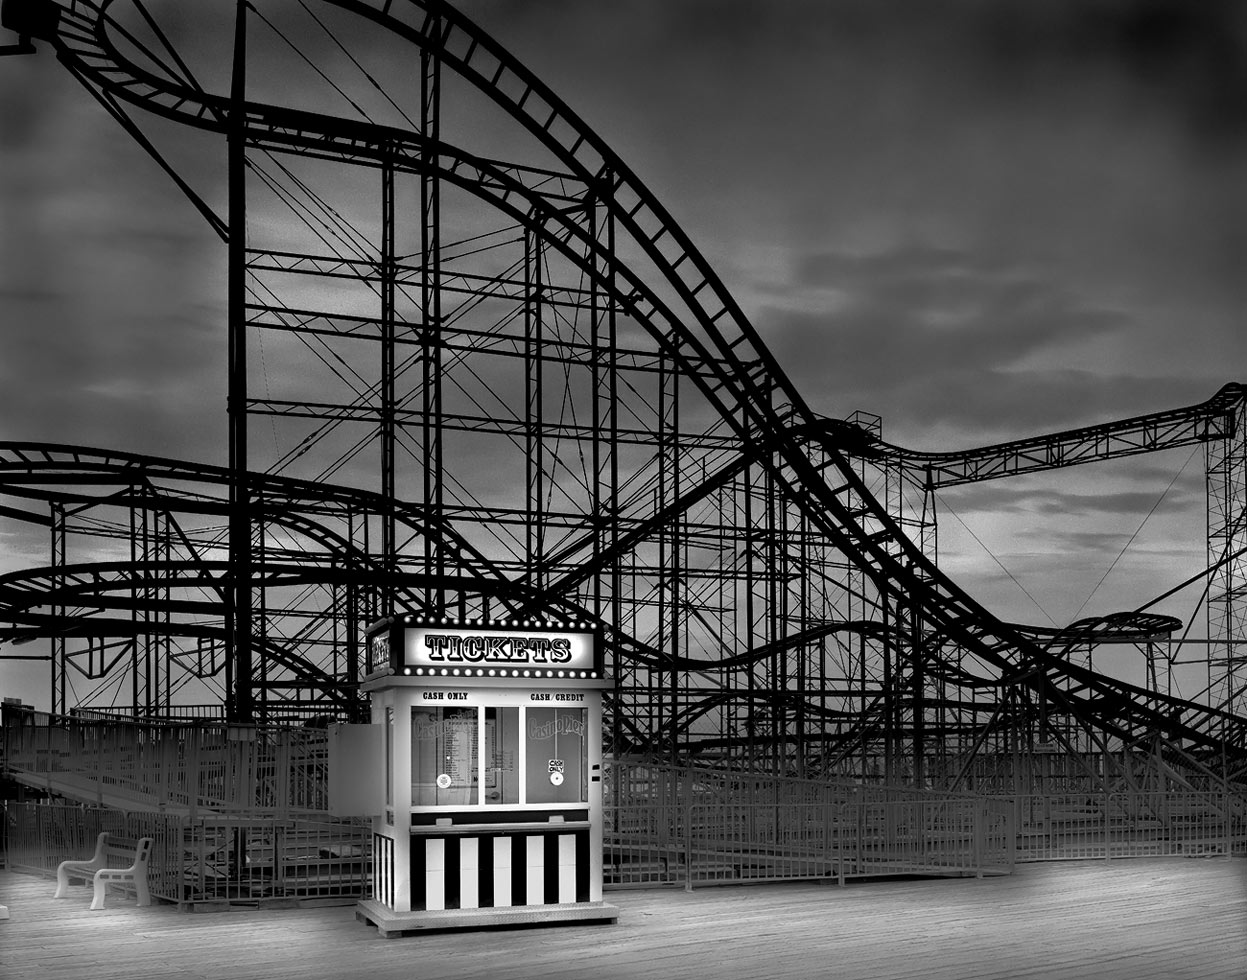 Casino Pier, the 'Jet Star,' 2009.
One of several stunning images of the Jersey Shore from Michael Massaia's series 'Afterlife,' in which he makes long exposures at night when "the sun is not dictating the shadows," and there's nobody around.